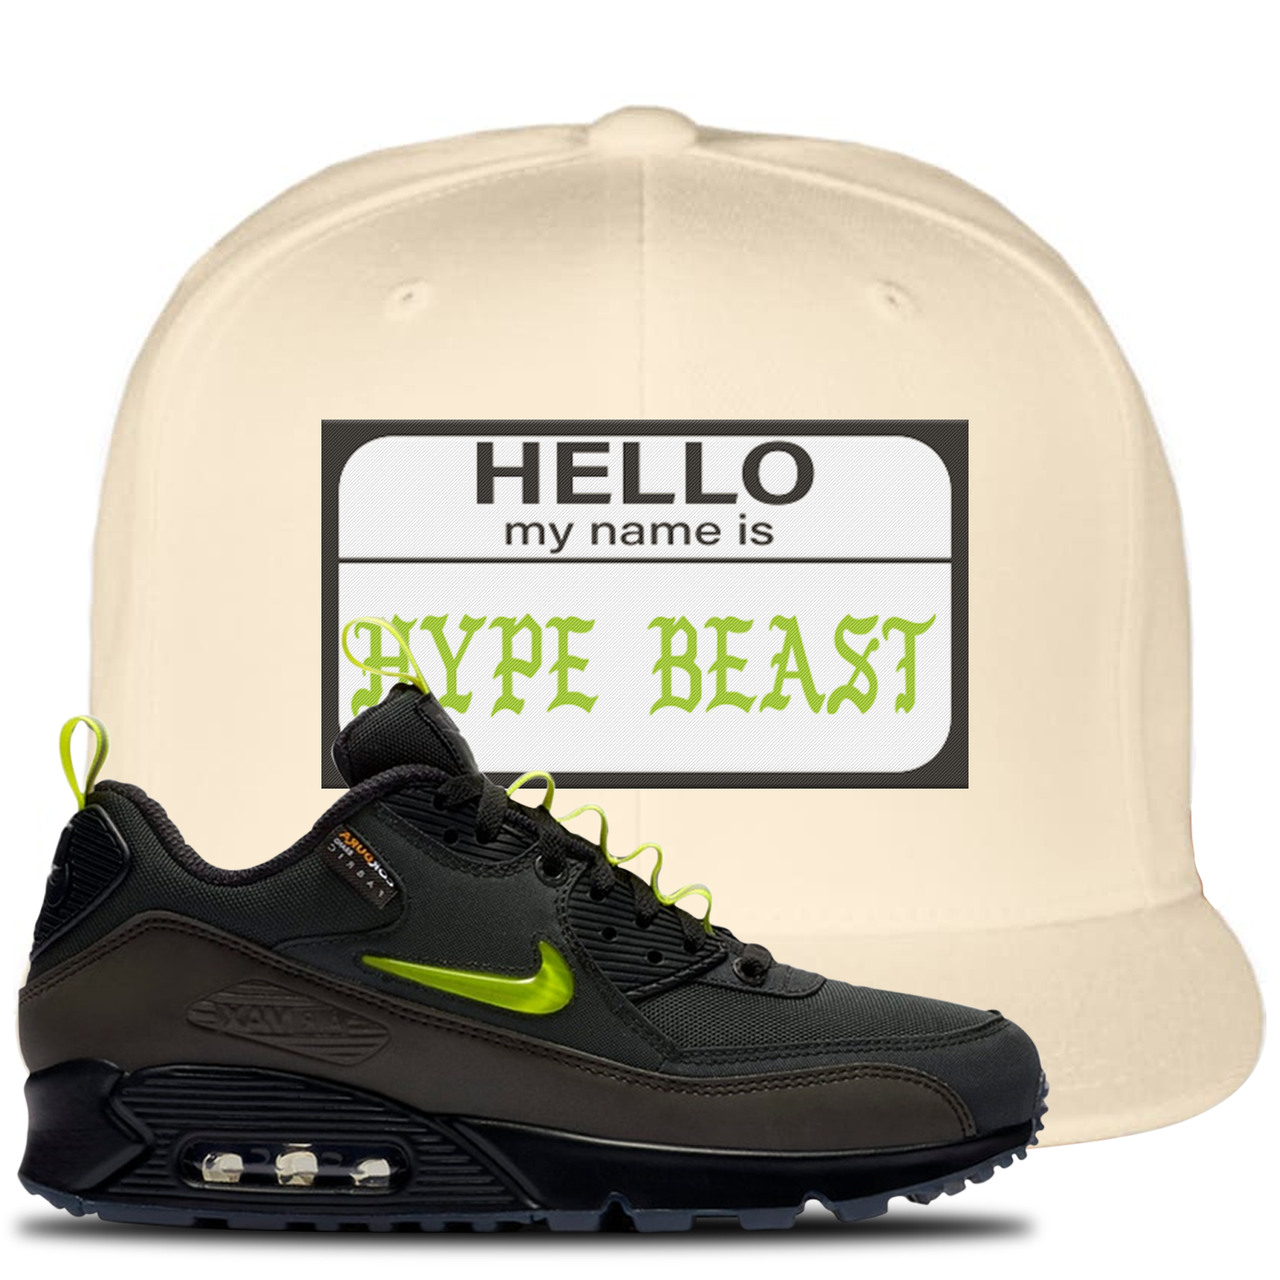 The Basement X Air Max 90 Manchester Hello My Name is Hype Beast White Sneaker Hook Up Snapback Hat